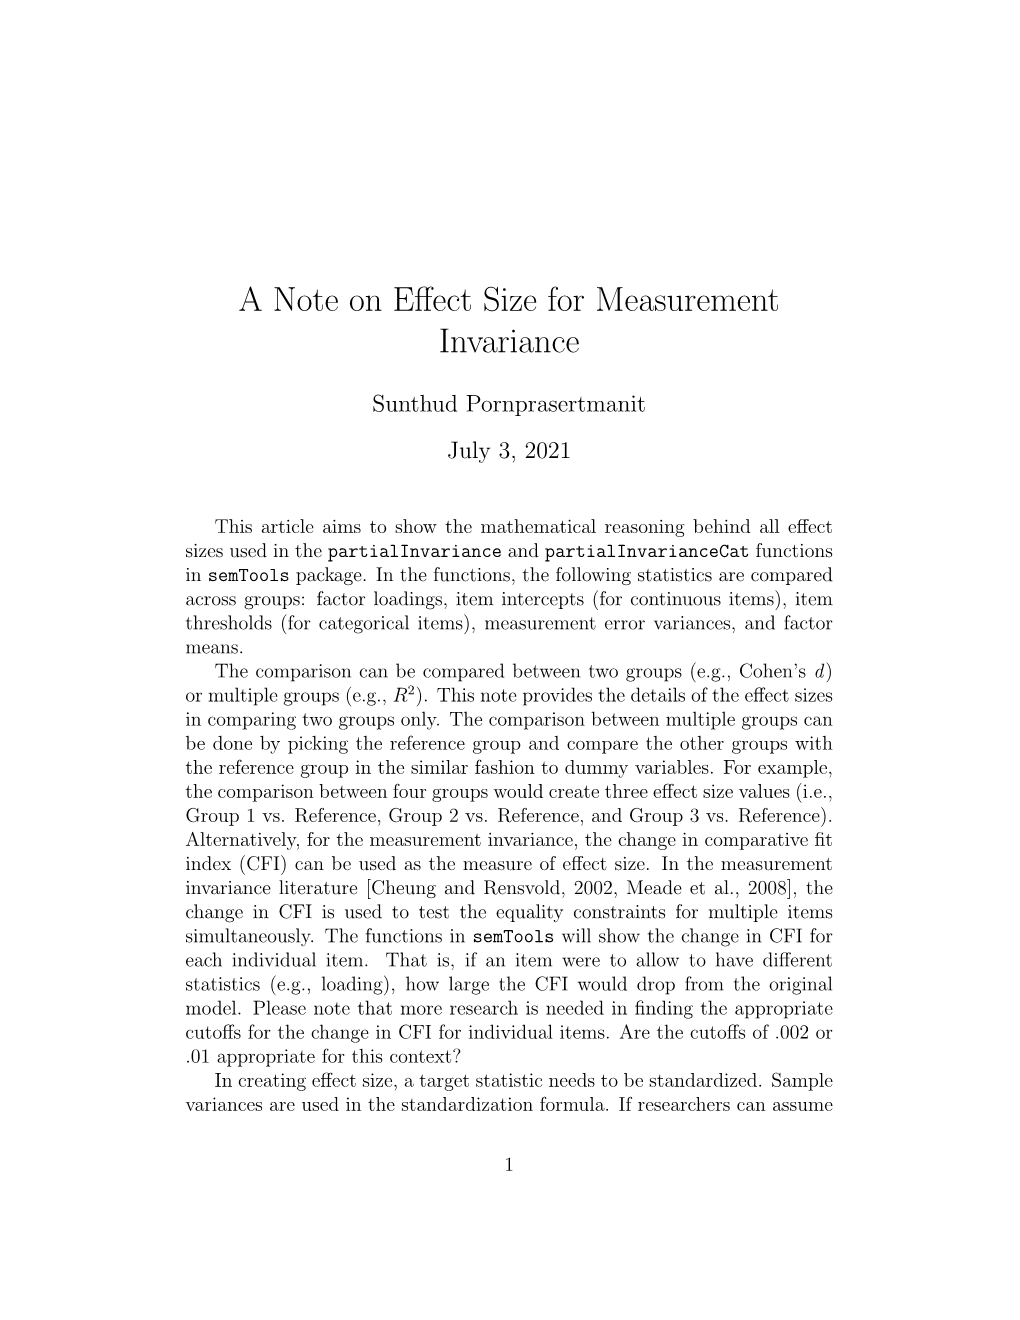 A Note on Effect Size for Measurement Invariance